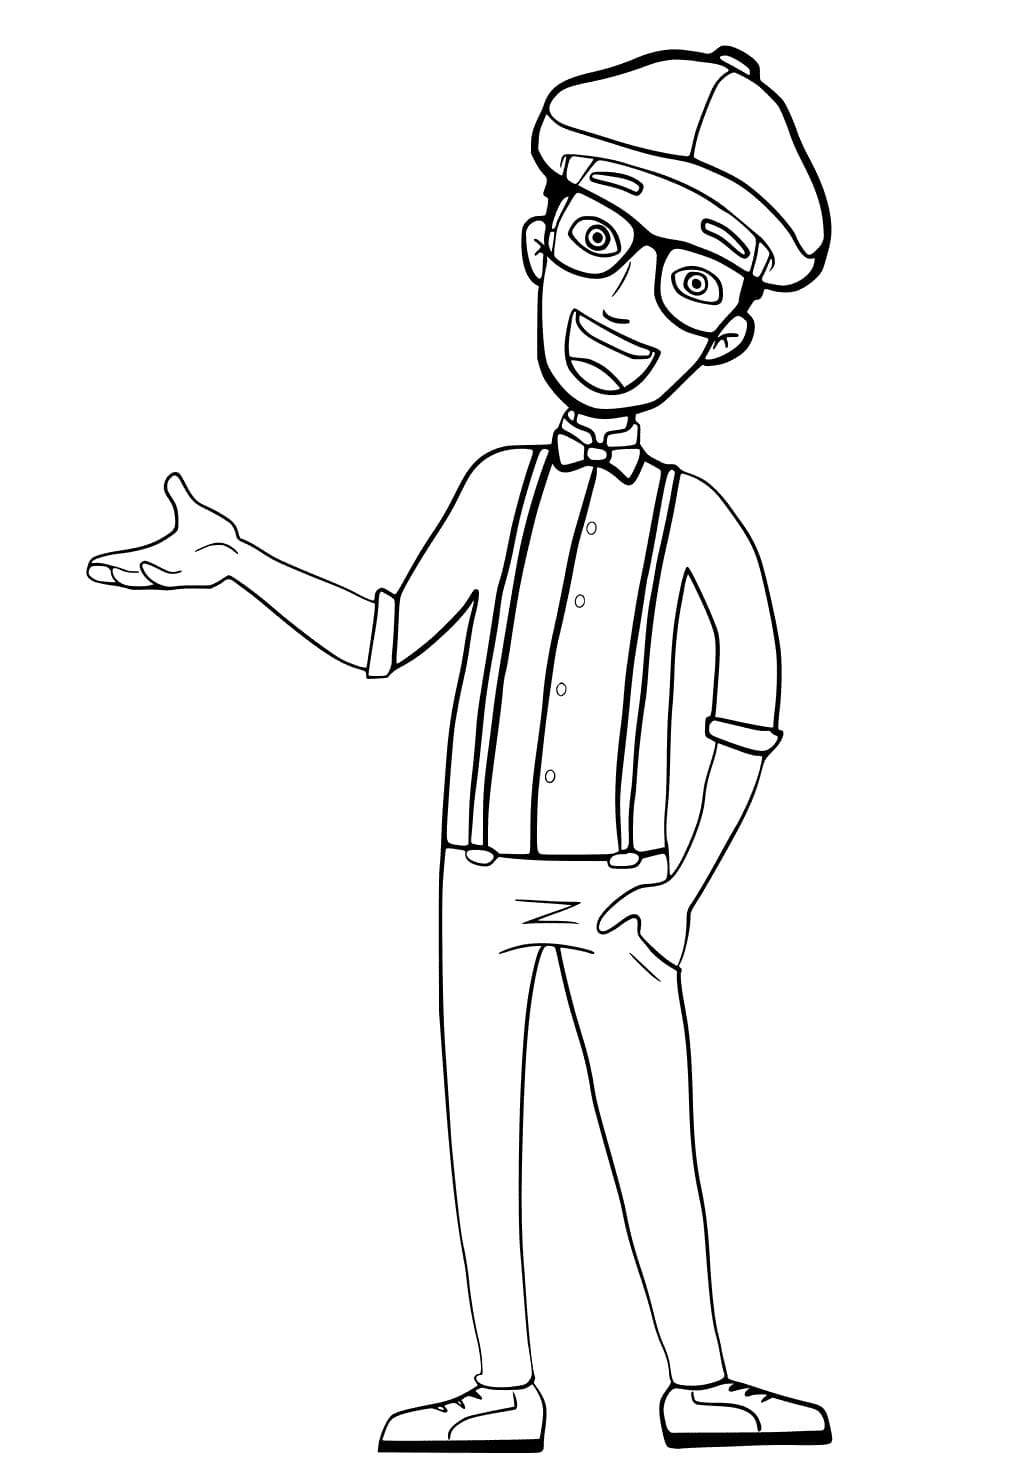 Blippi coloring page